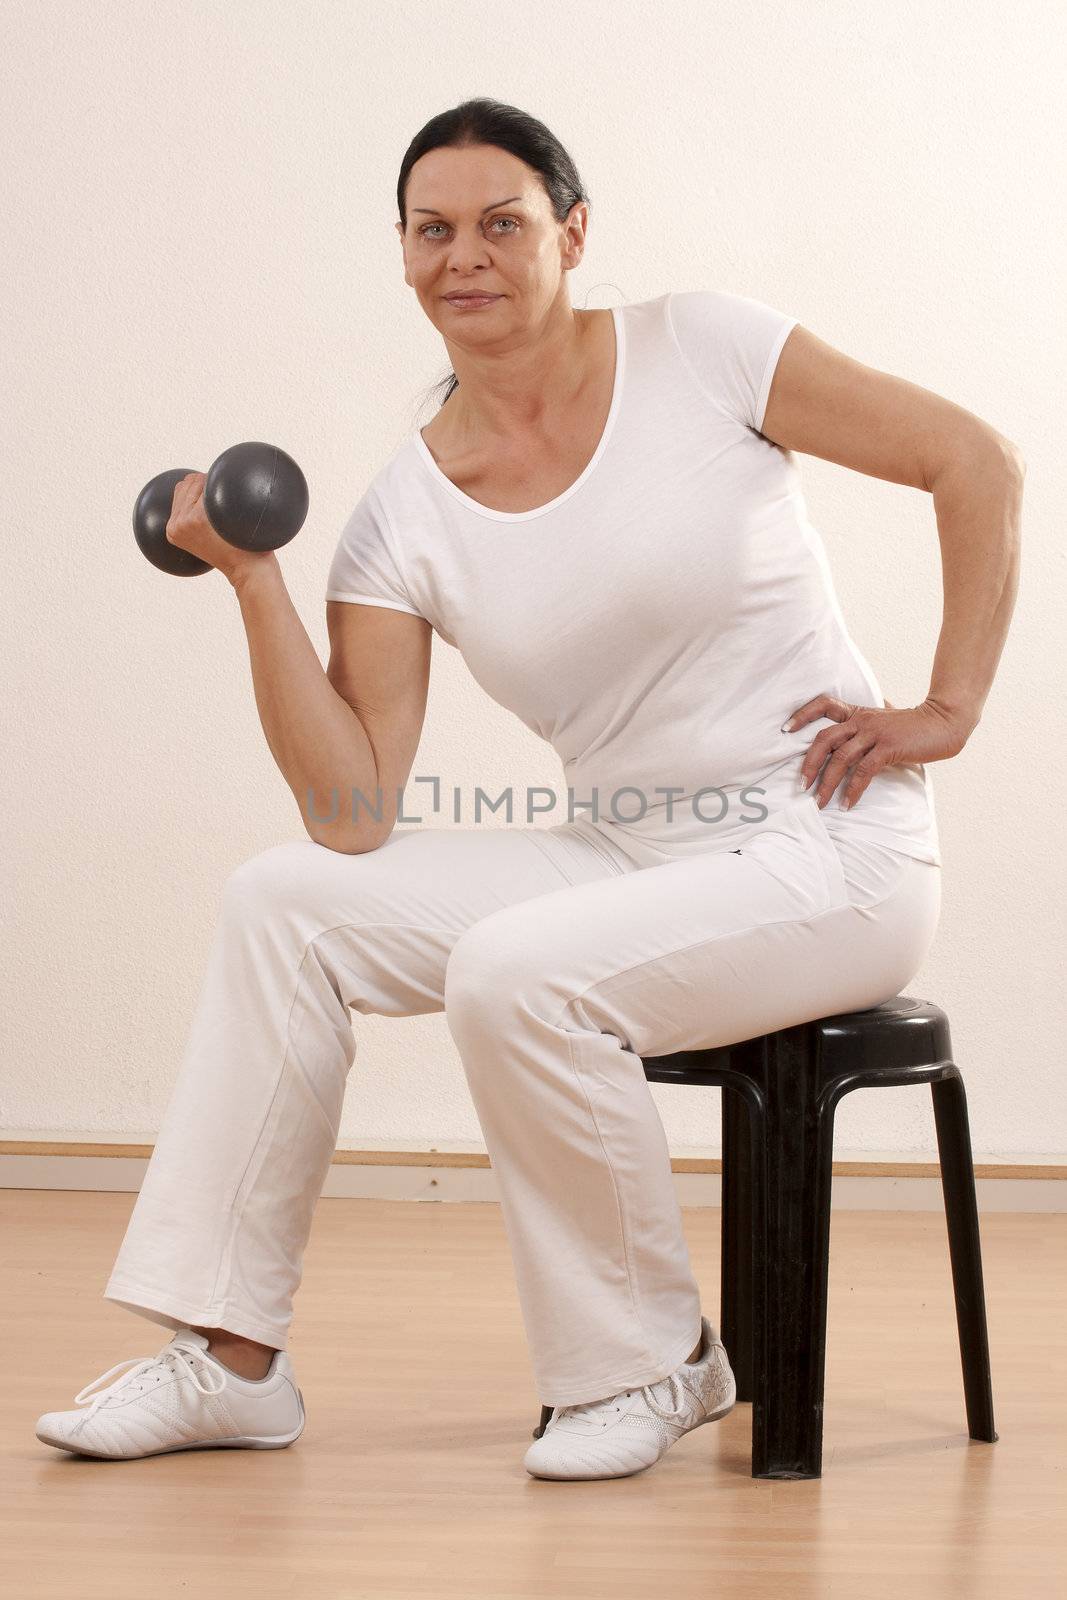 Woman over forty, sitting on a training exercise